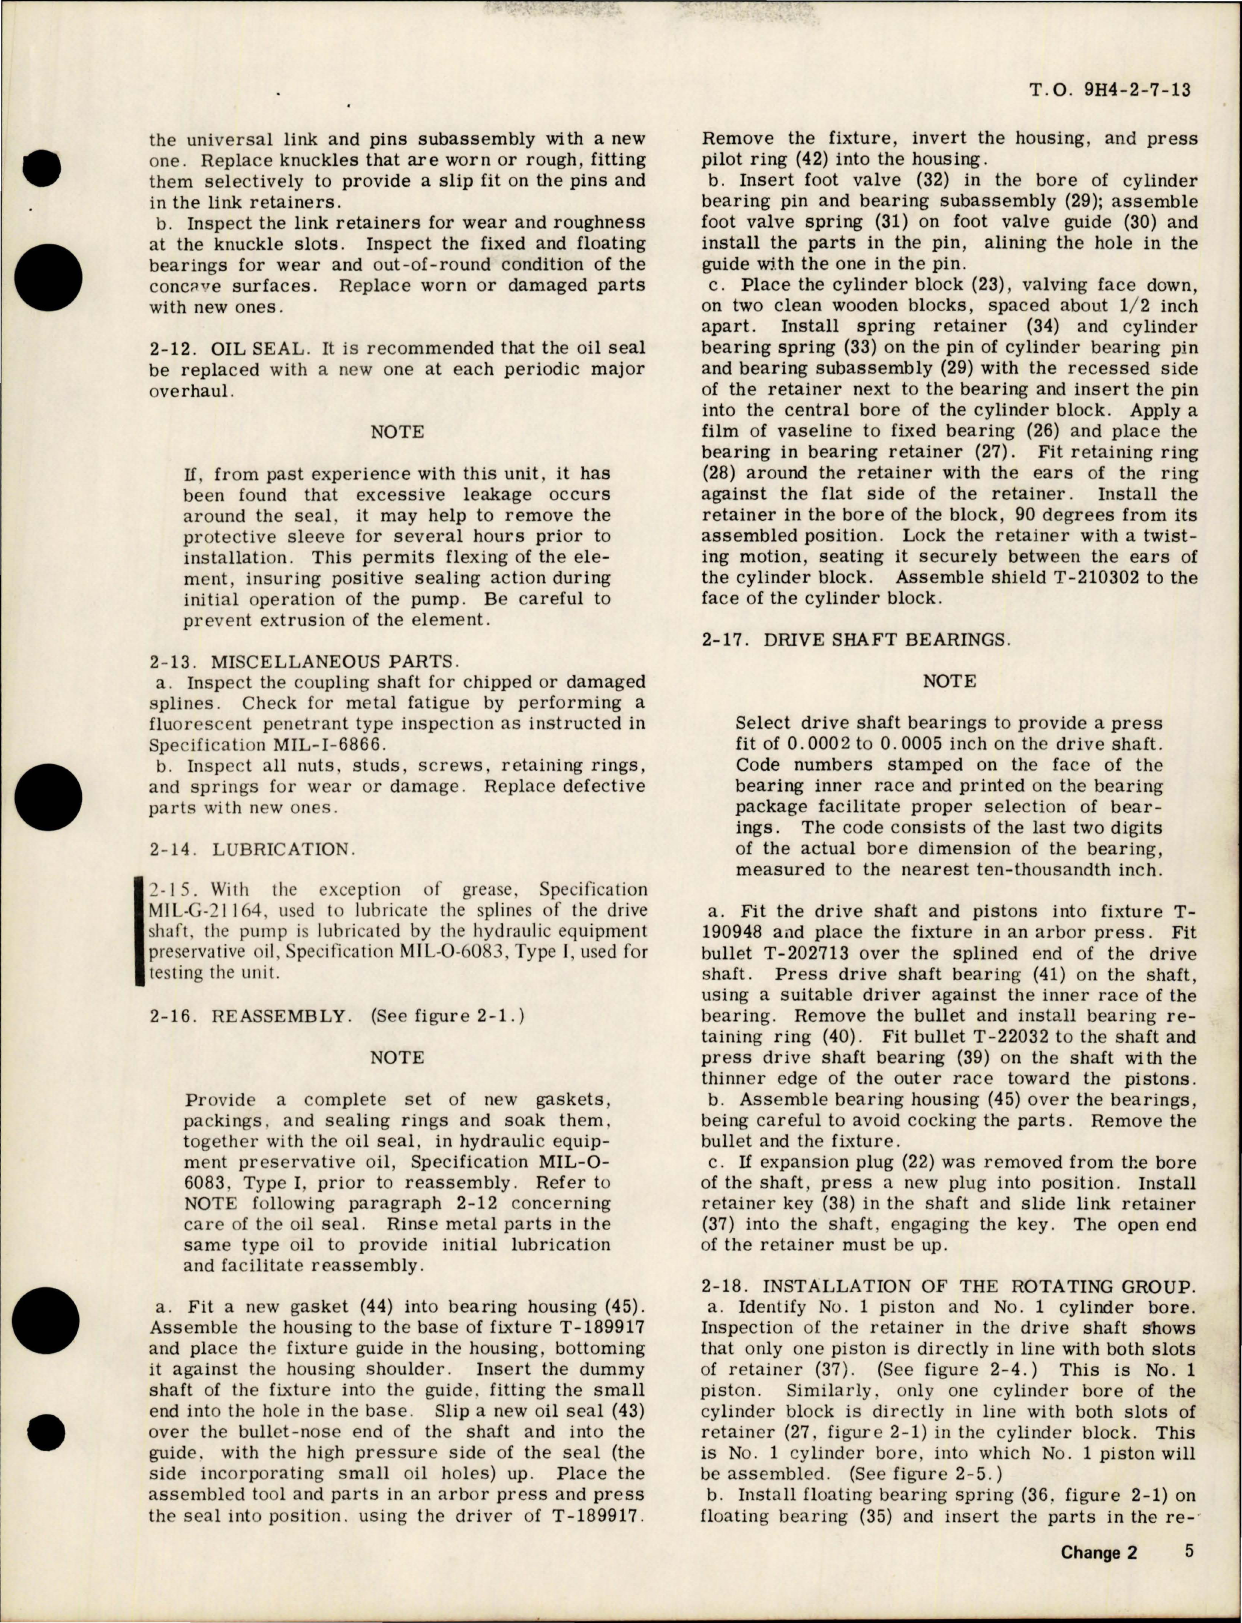 Sample page 9 from AirCorps Library document: Overhaul Instructions for Constant Displacement Hydraulic Pump Assemblies - PF-713 Series 